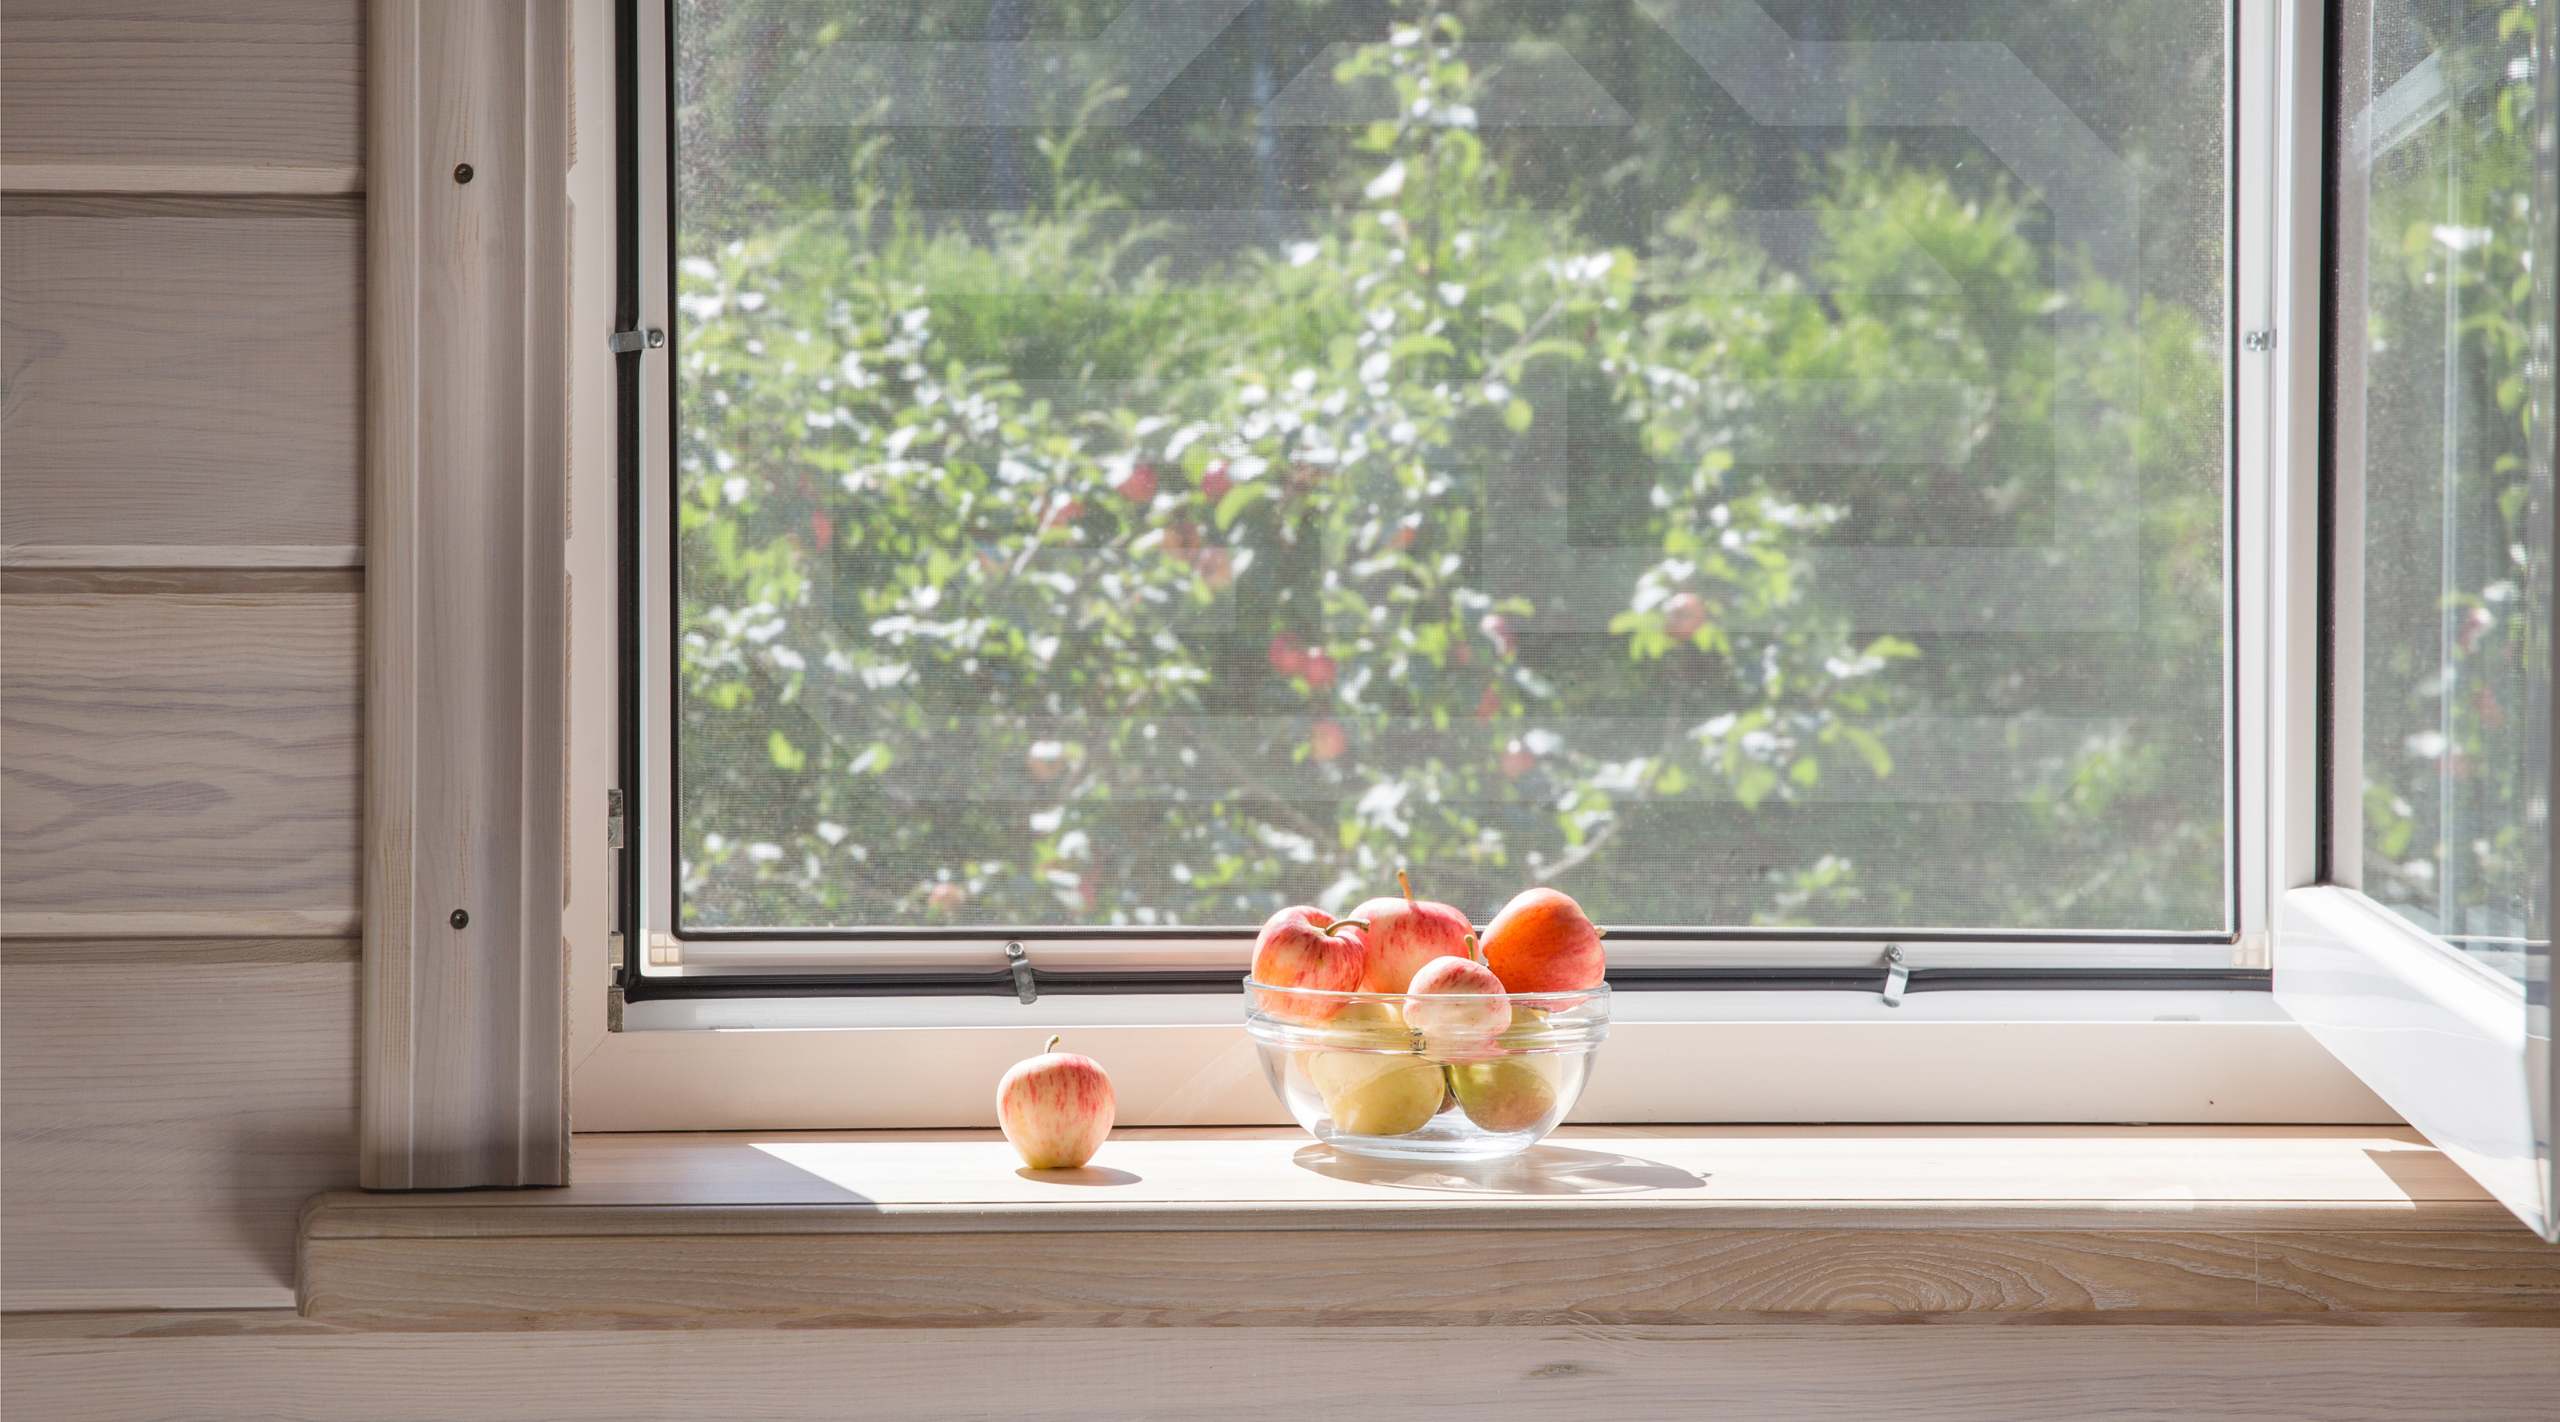 A bowl of apples resting on a window sill with an apple tree outside.